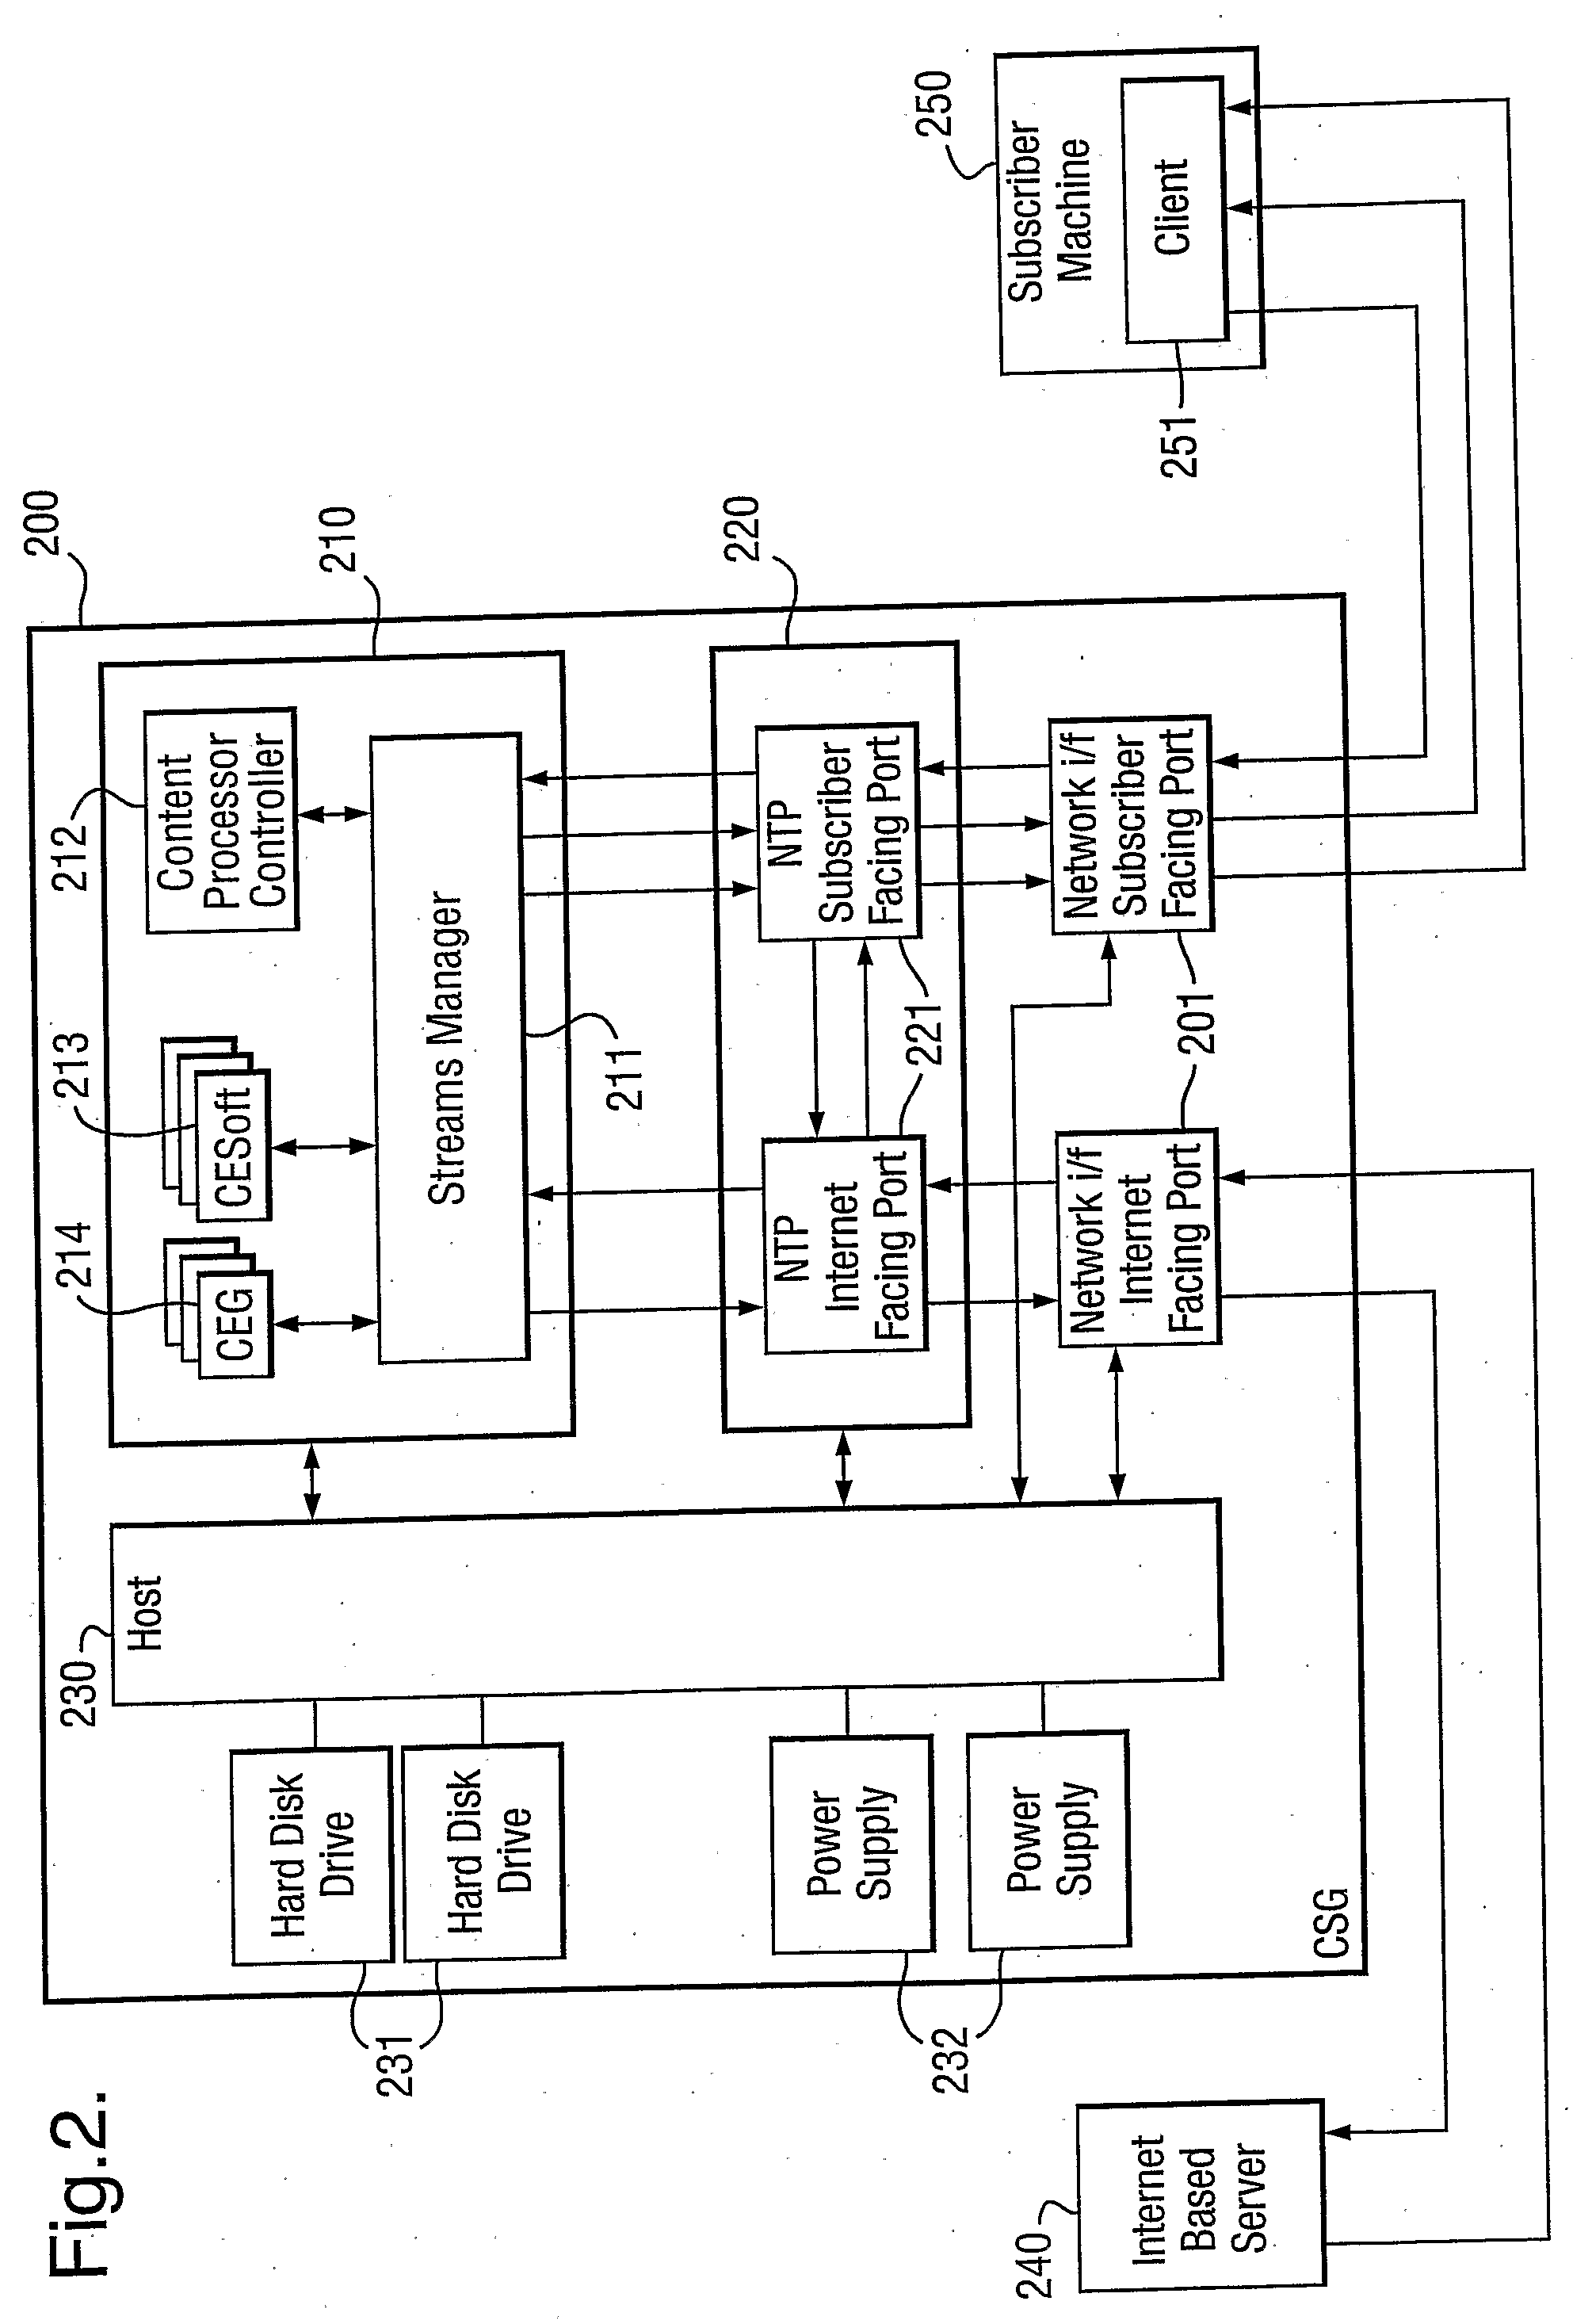 Network implemented content processing system